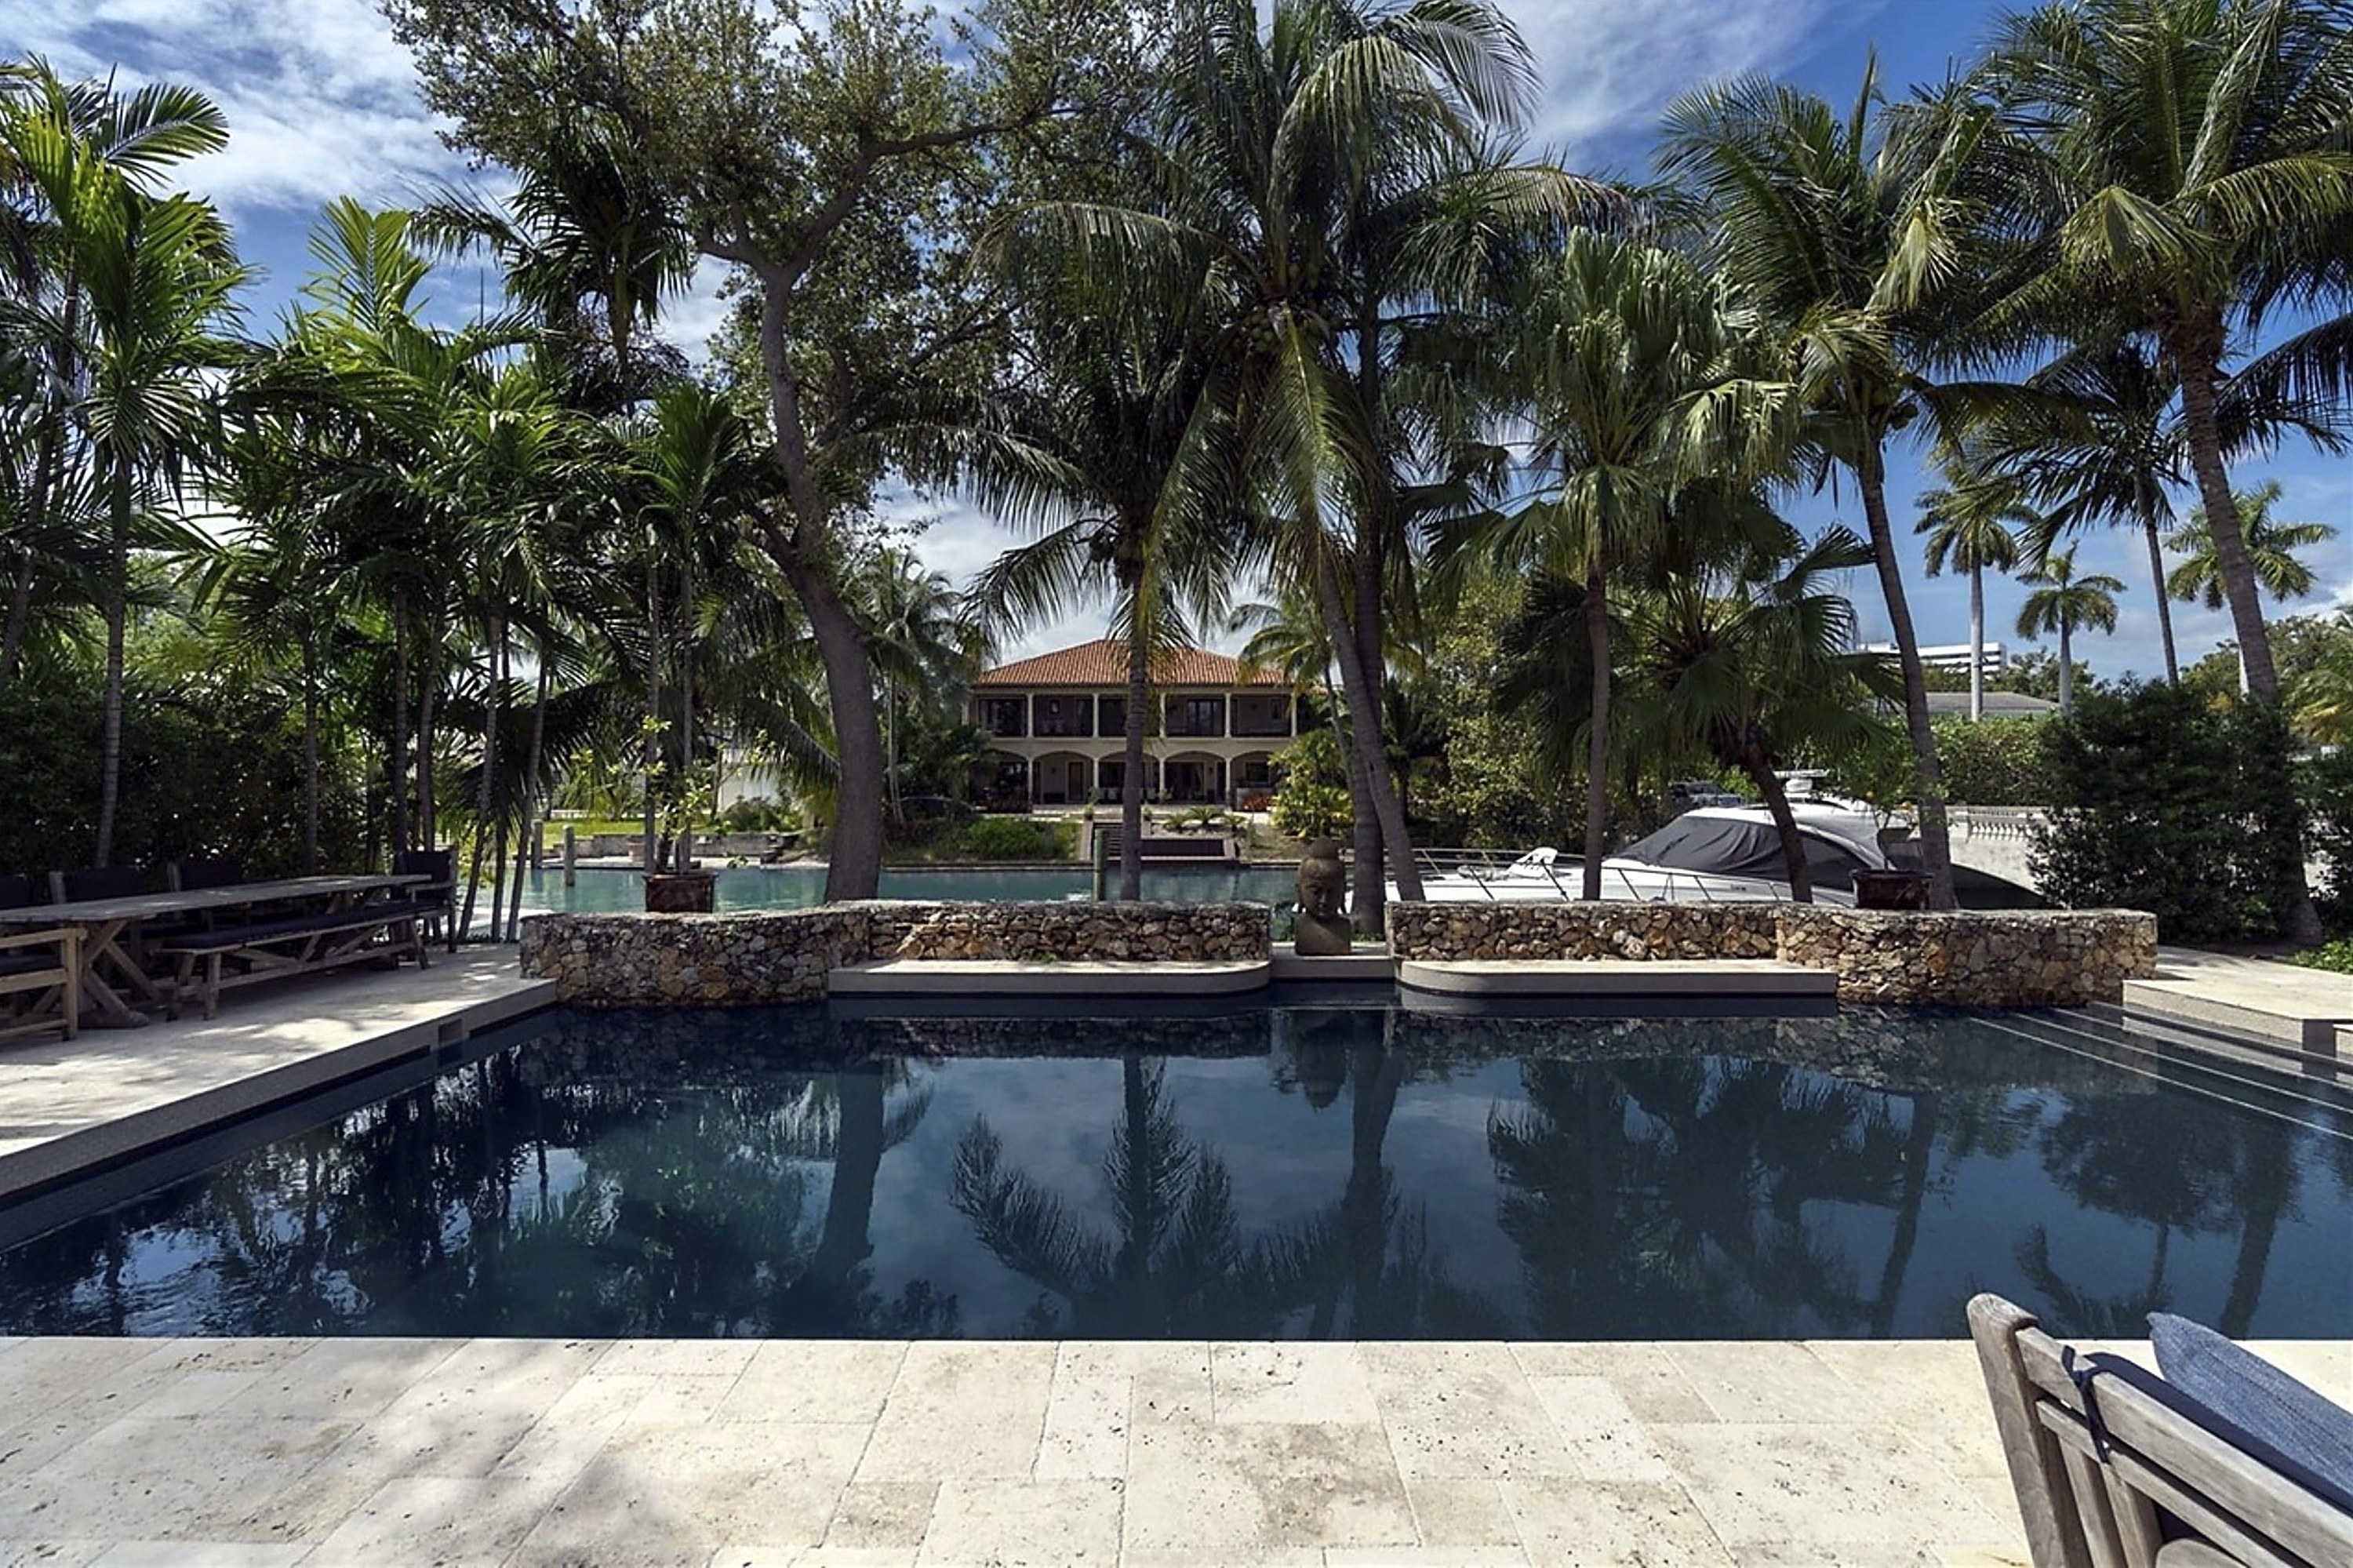 Large sunken rectangular pool surrounded by palm trees